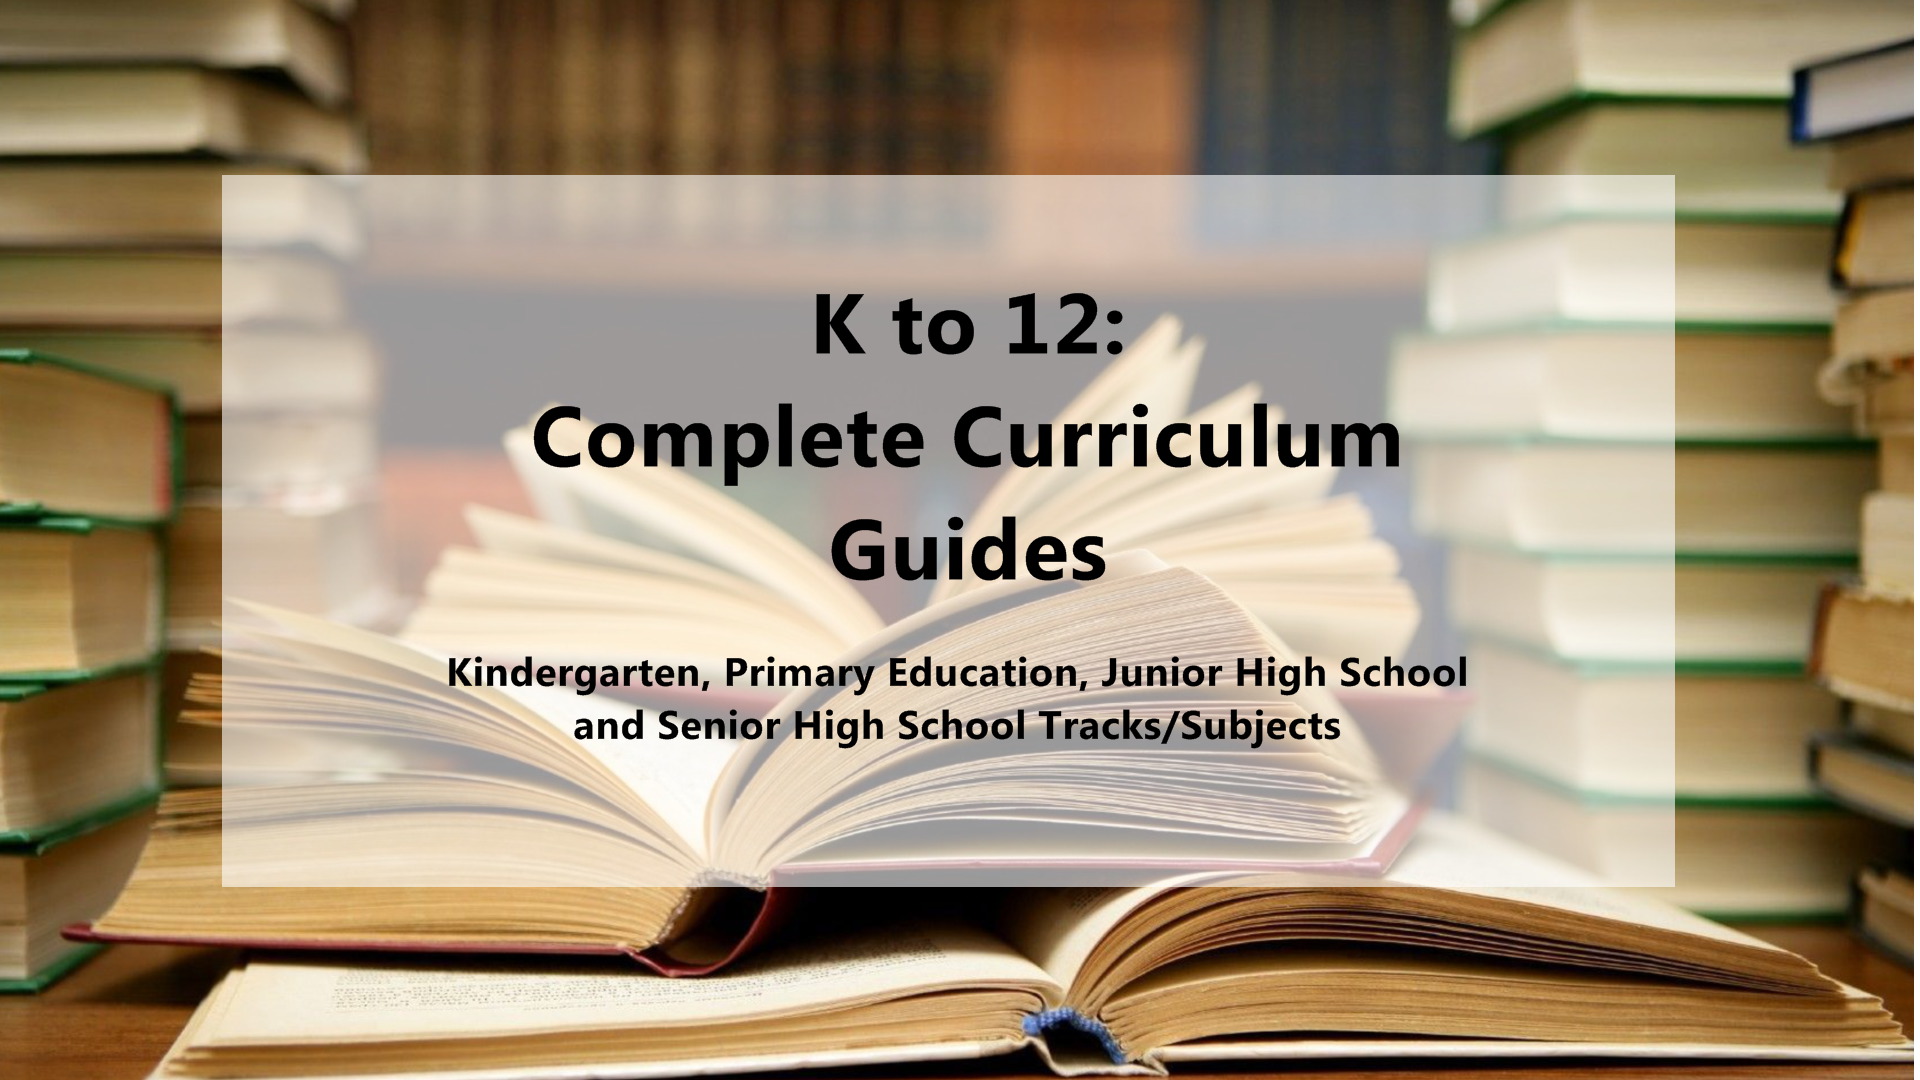 deped-k-to-12-complete-curriculum-guides-cg-2017